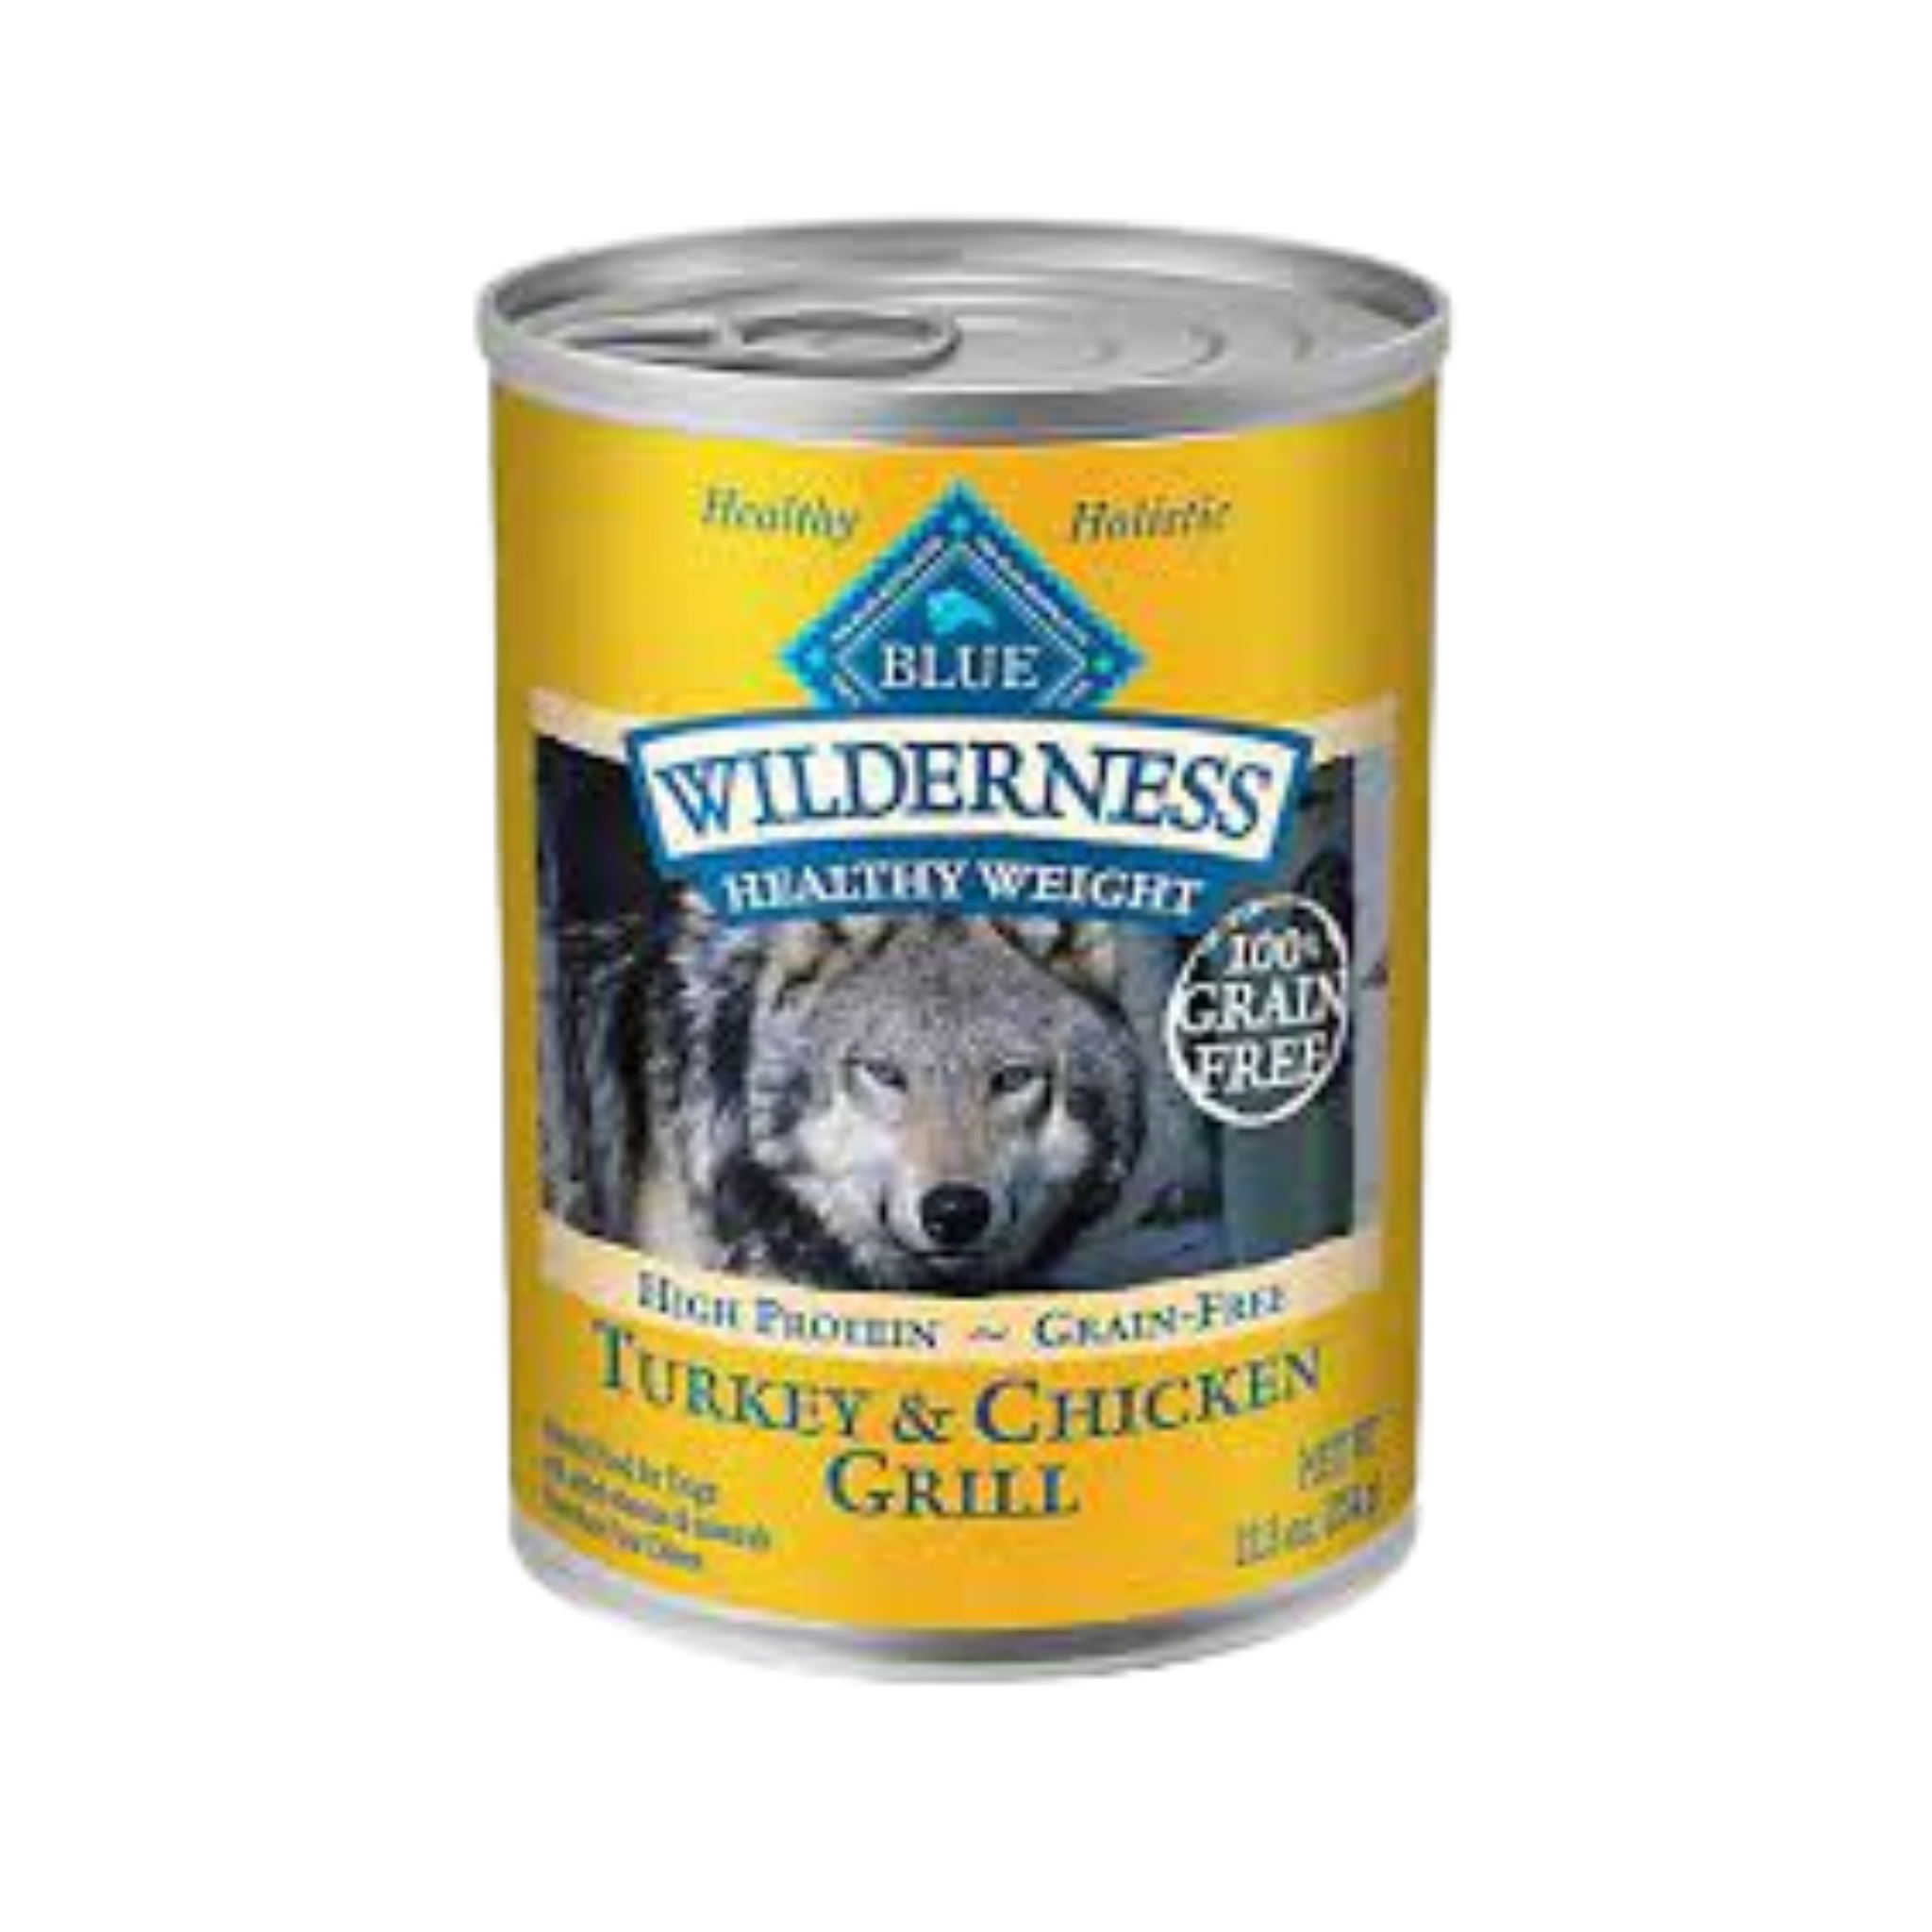 Blue Buffalo Wilderness Healthy Weight Adult Turkey and Chicken Grill Dog Canned